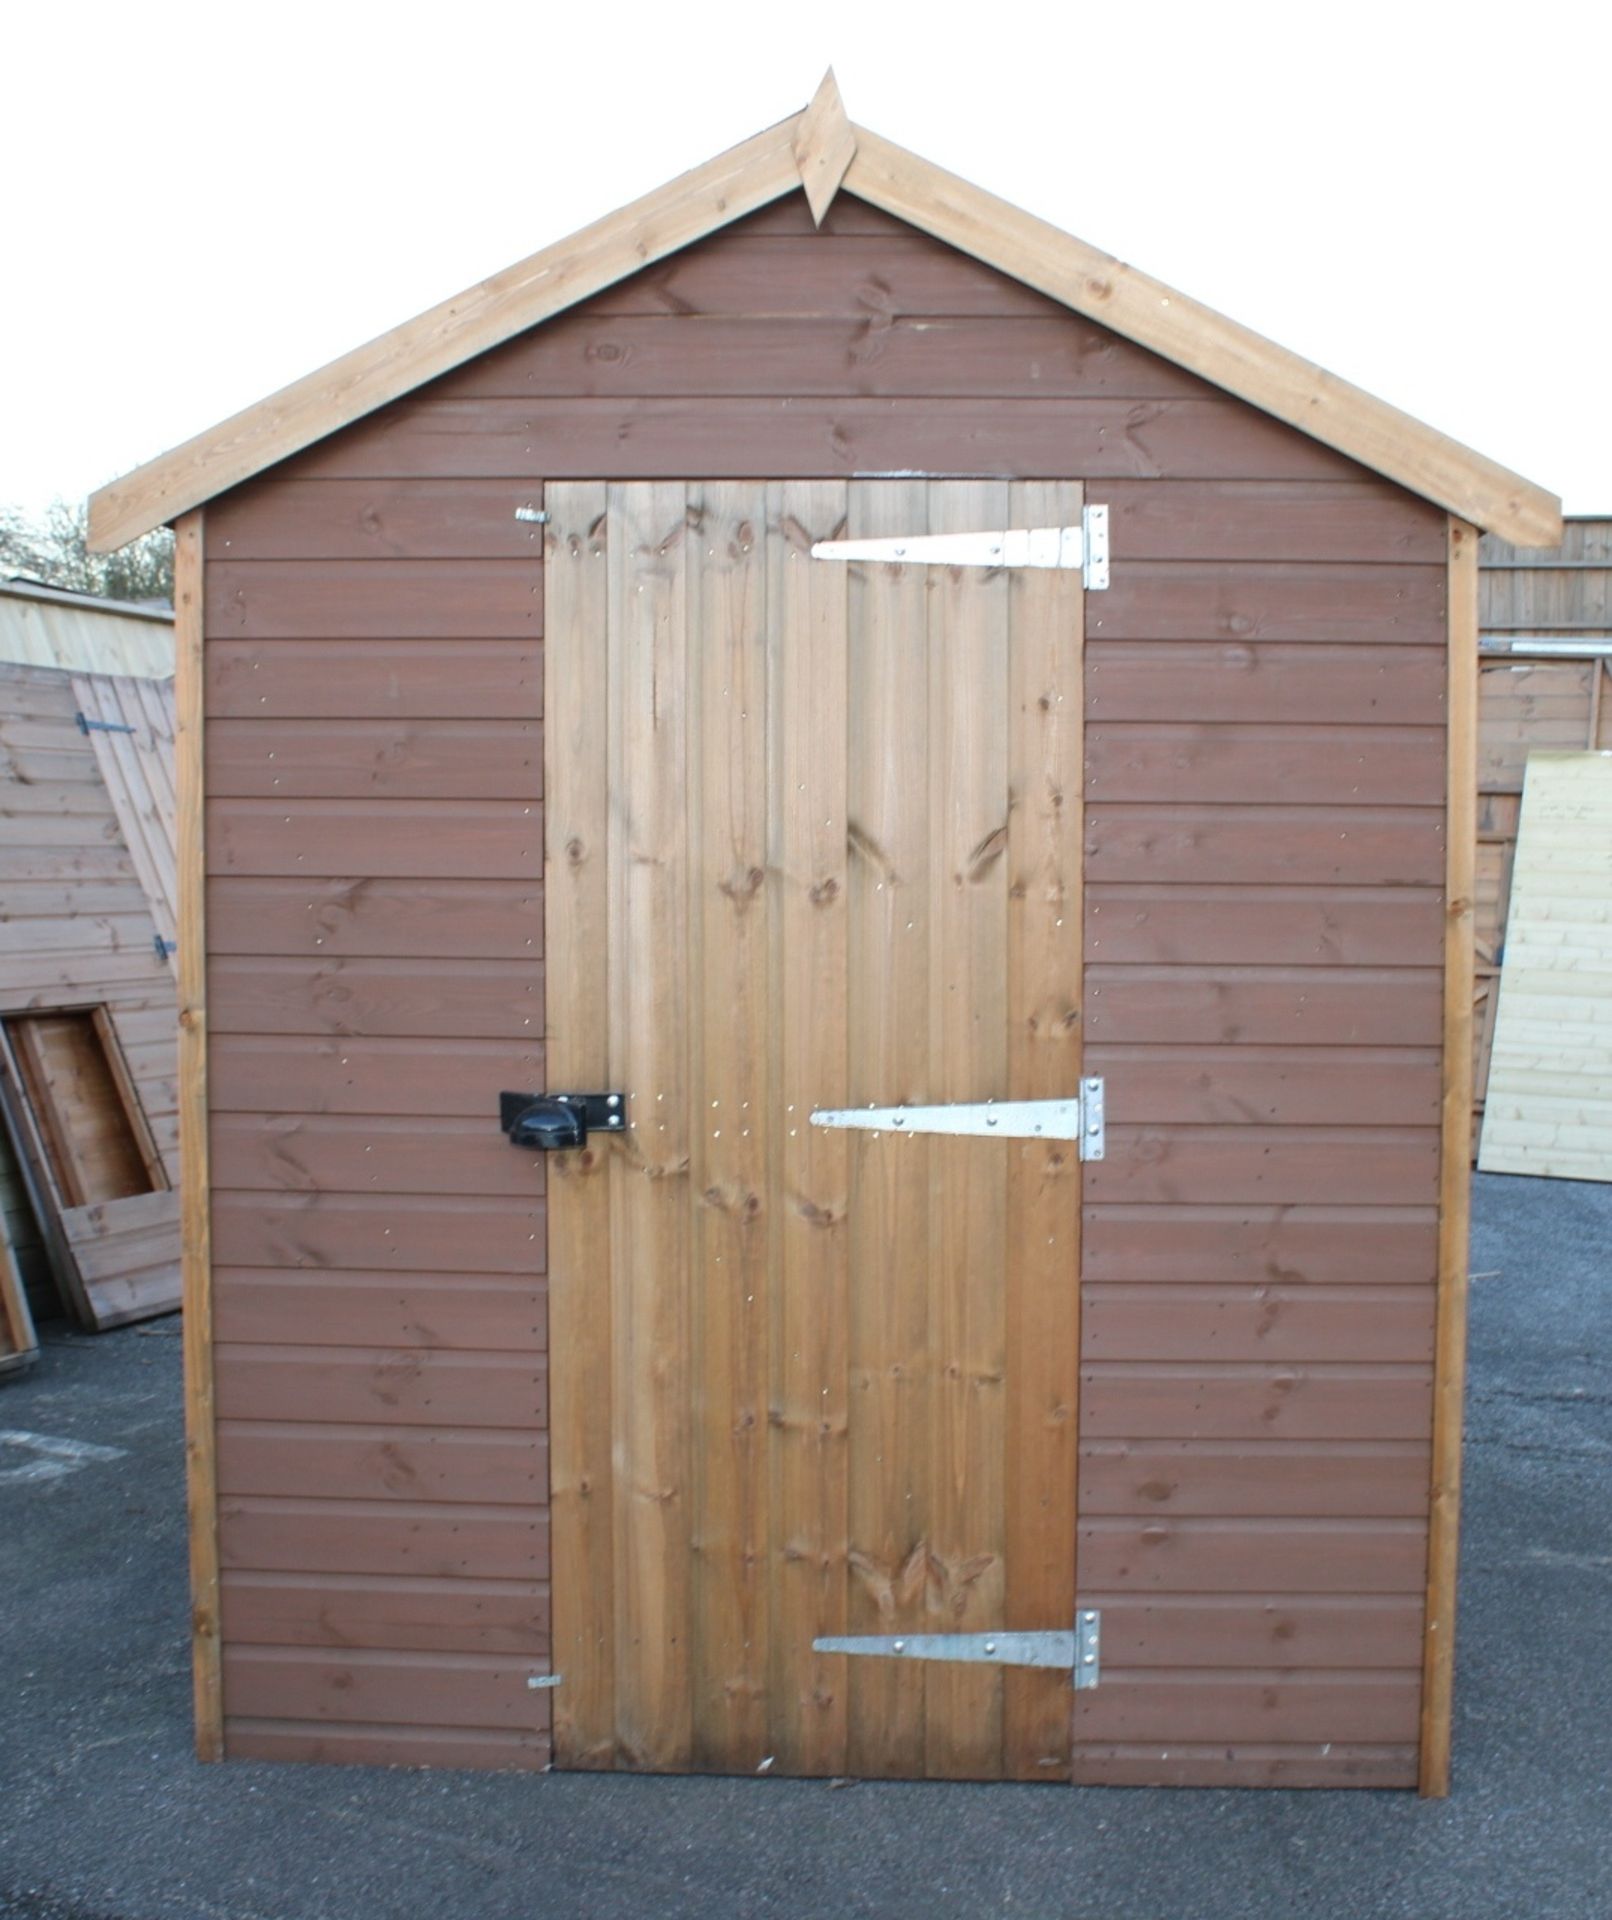 8x6 Superior apex shed with security door, Standard 16mm Nominal Cladding